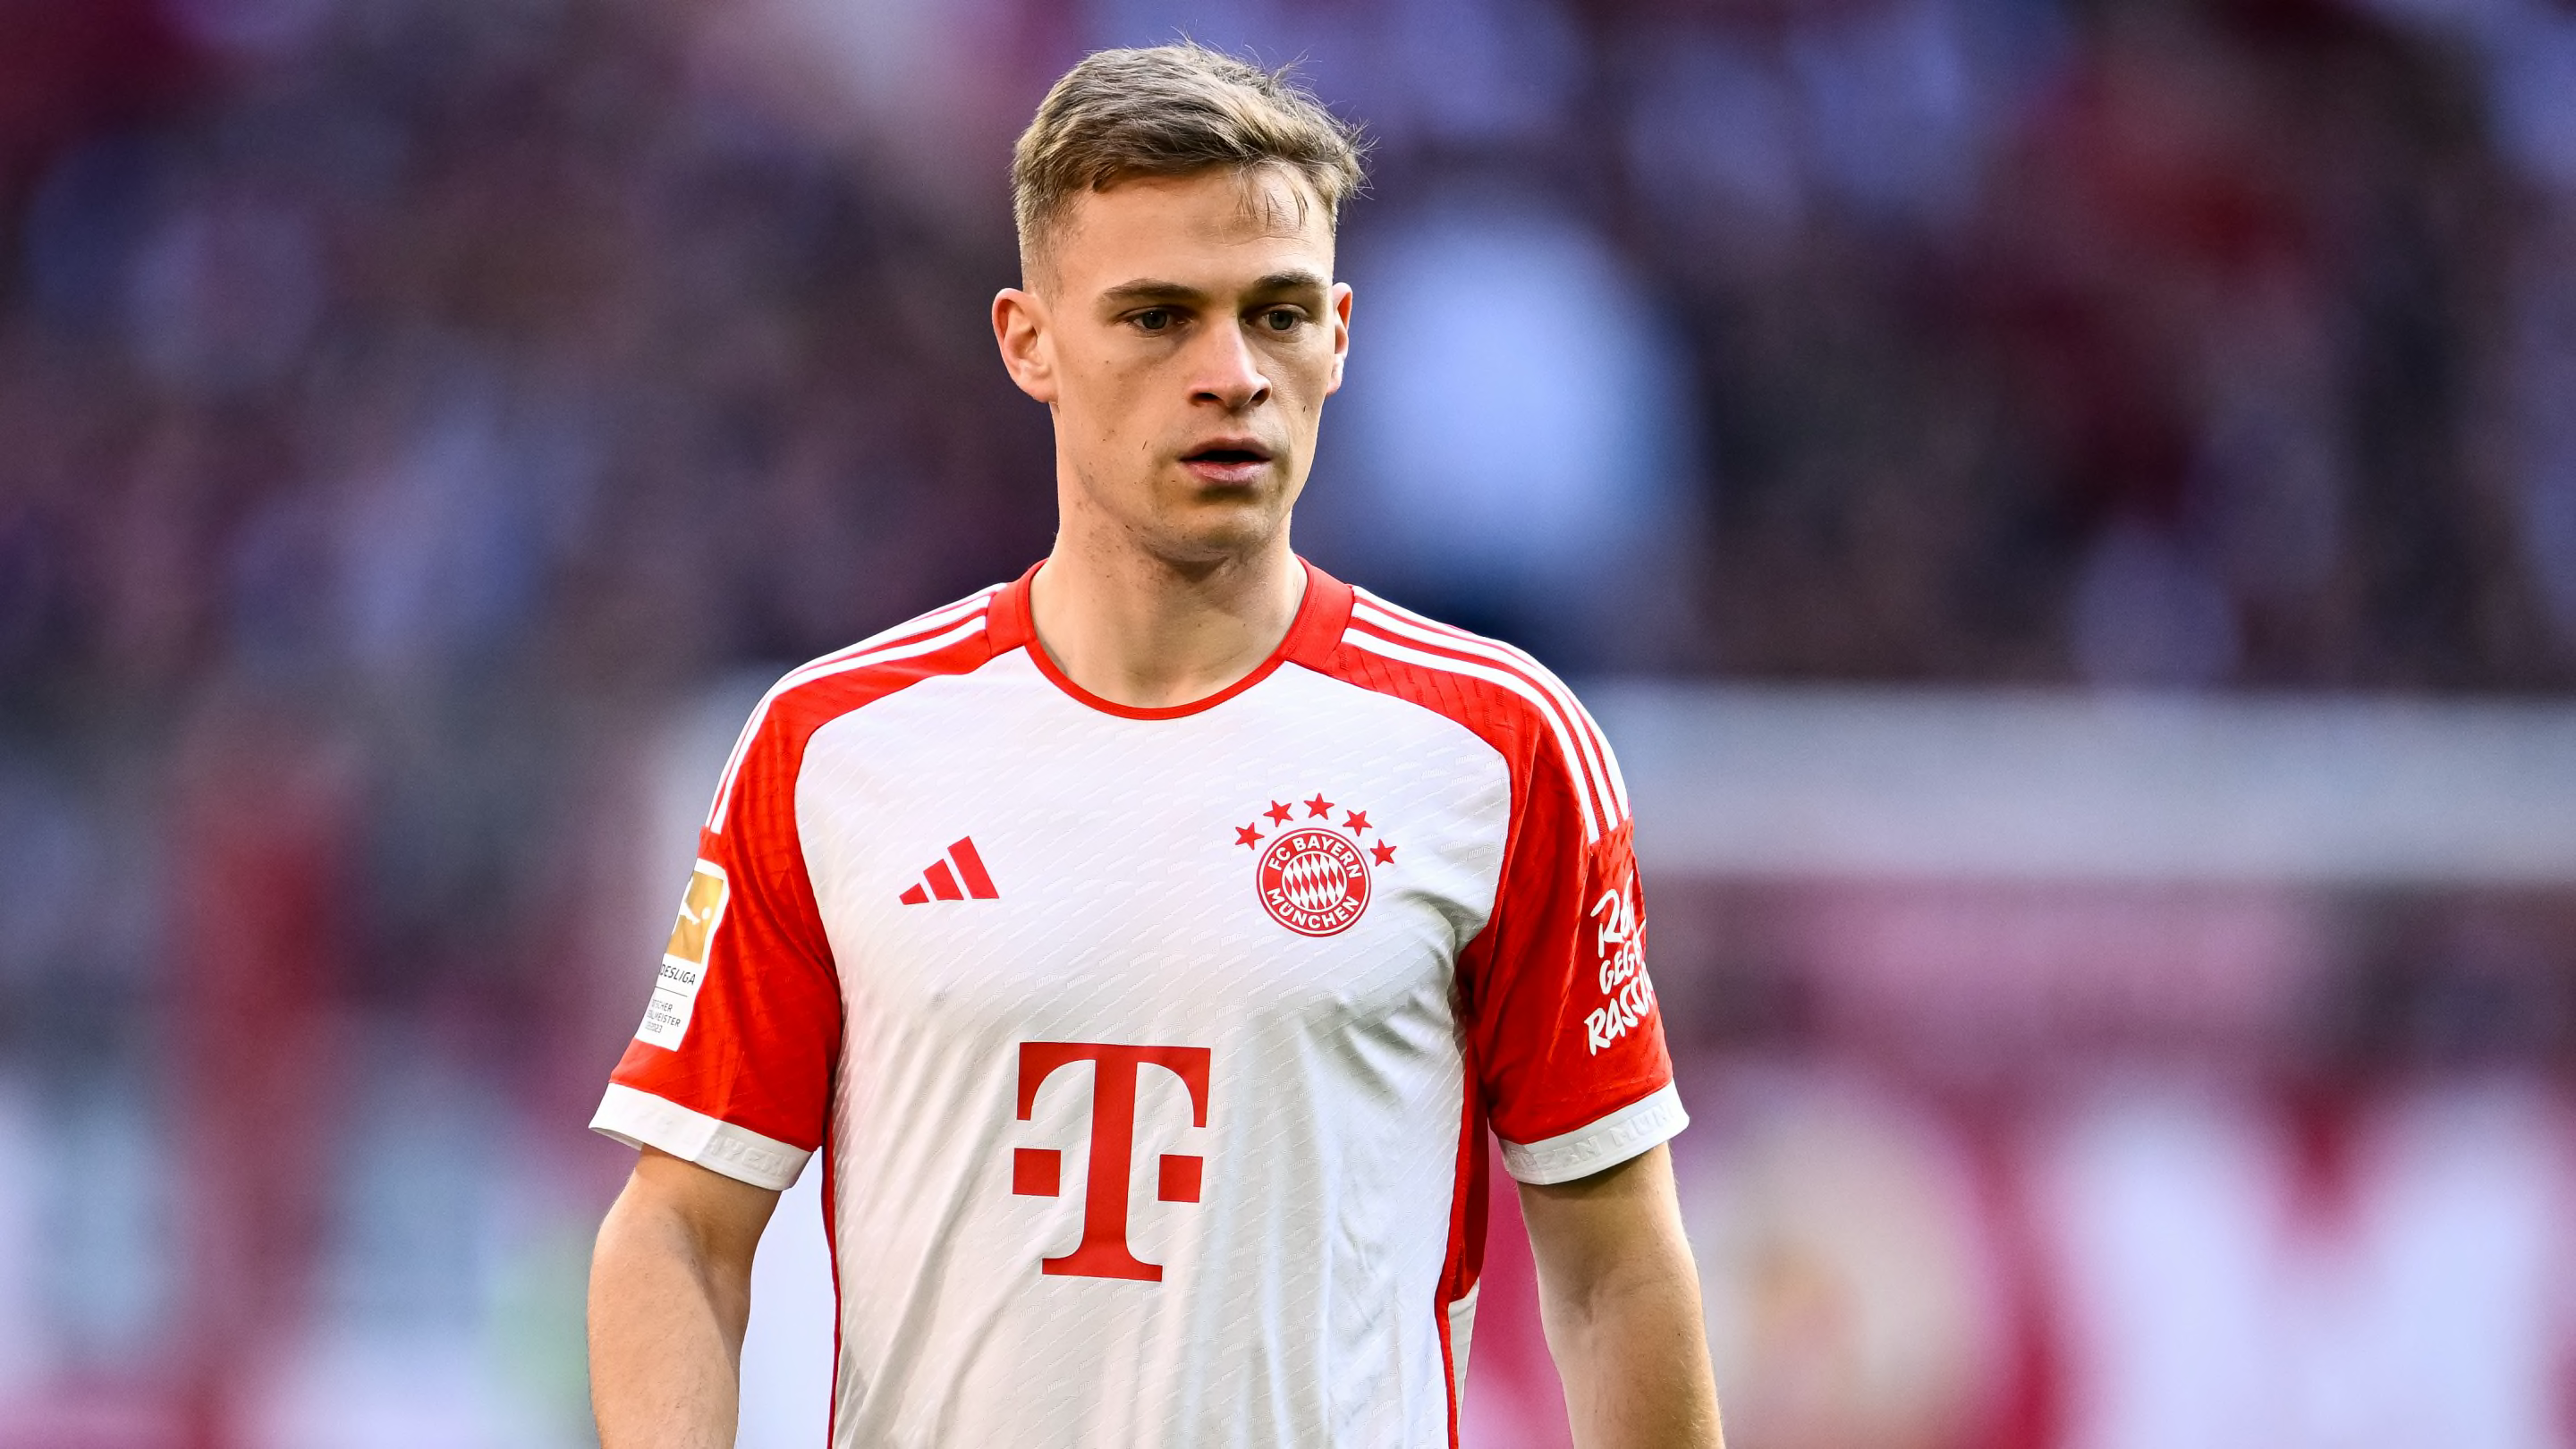 Joshua Kimmich becomes transfer 'priority' for Man Utd - report